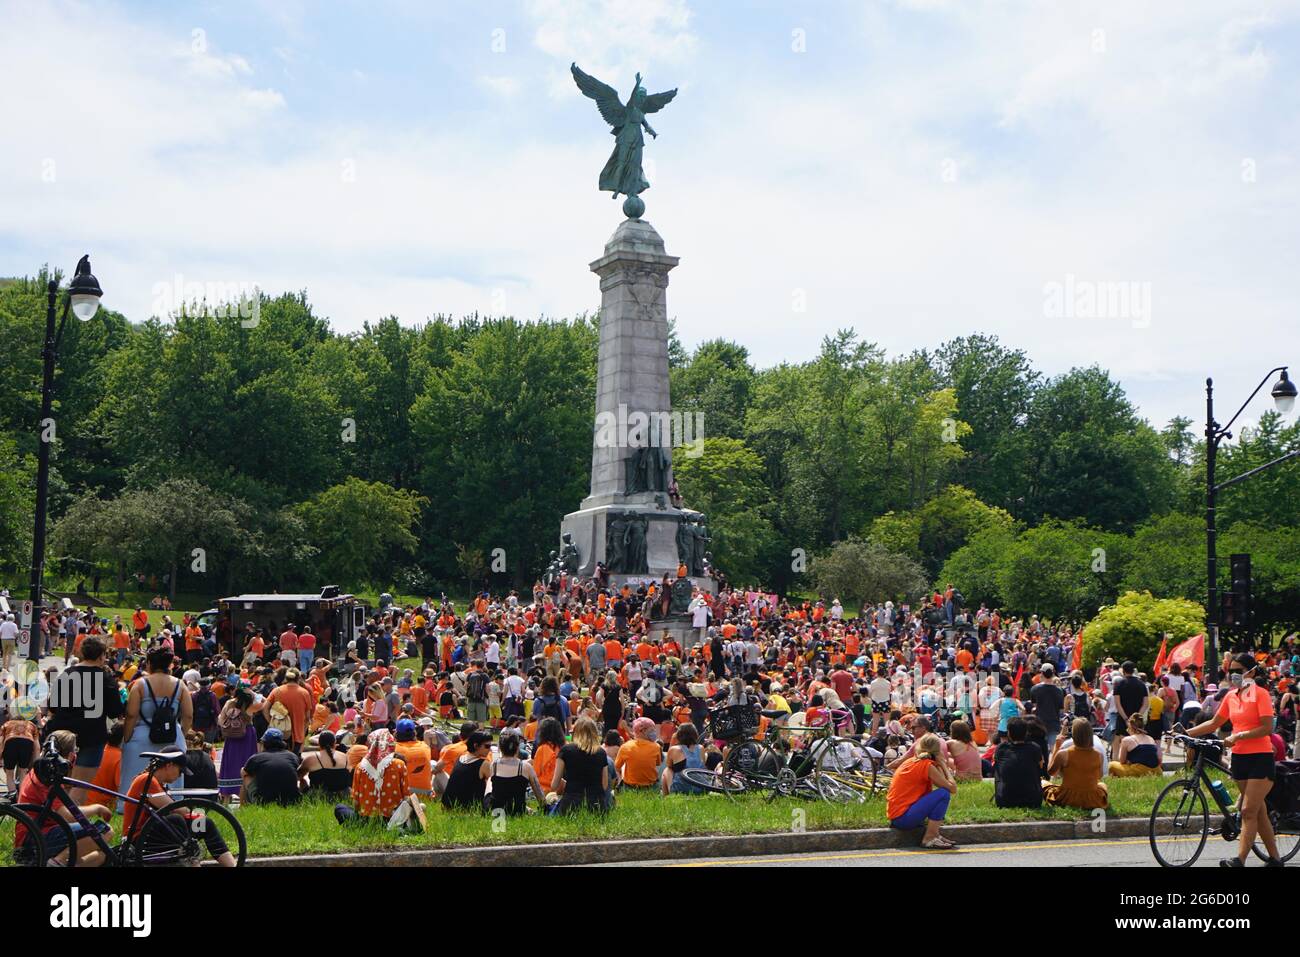 Montreal,Quebec,Canada,July 1, 2021.Huge crowd gathered to pay respects to the indigenous culture.Mario Beauregard/Alamy News Stock Photo